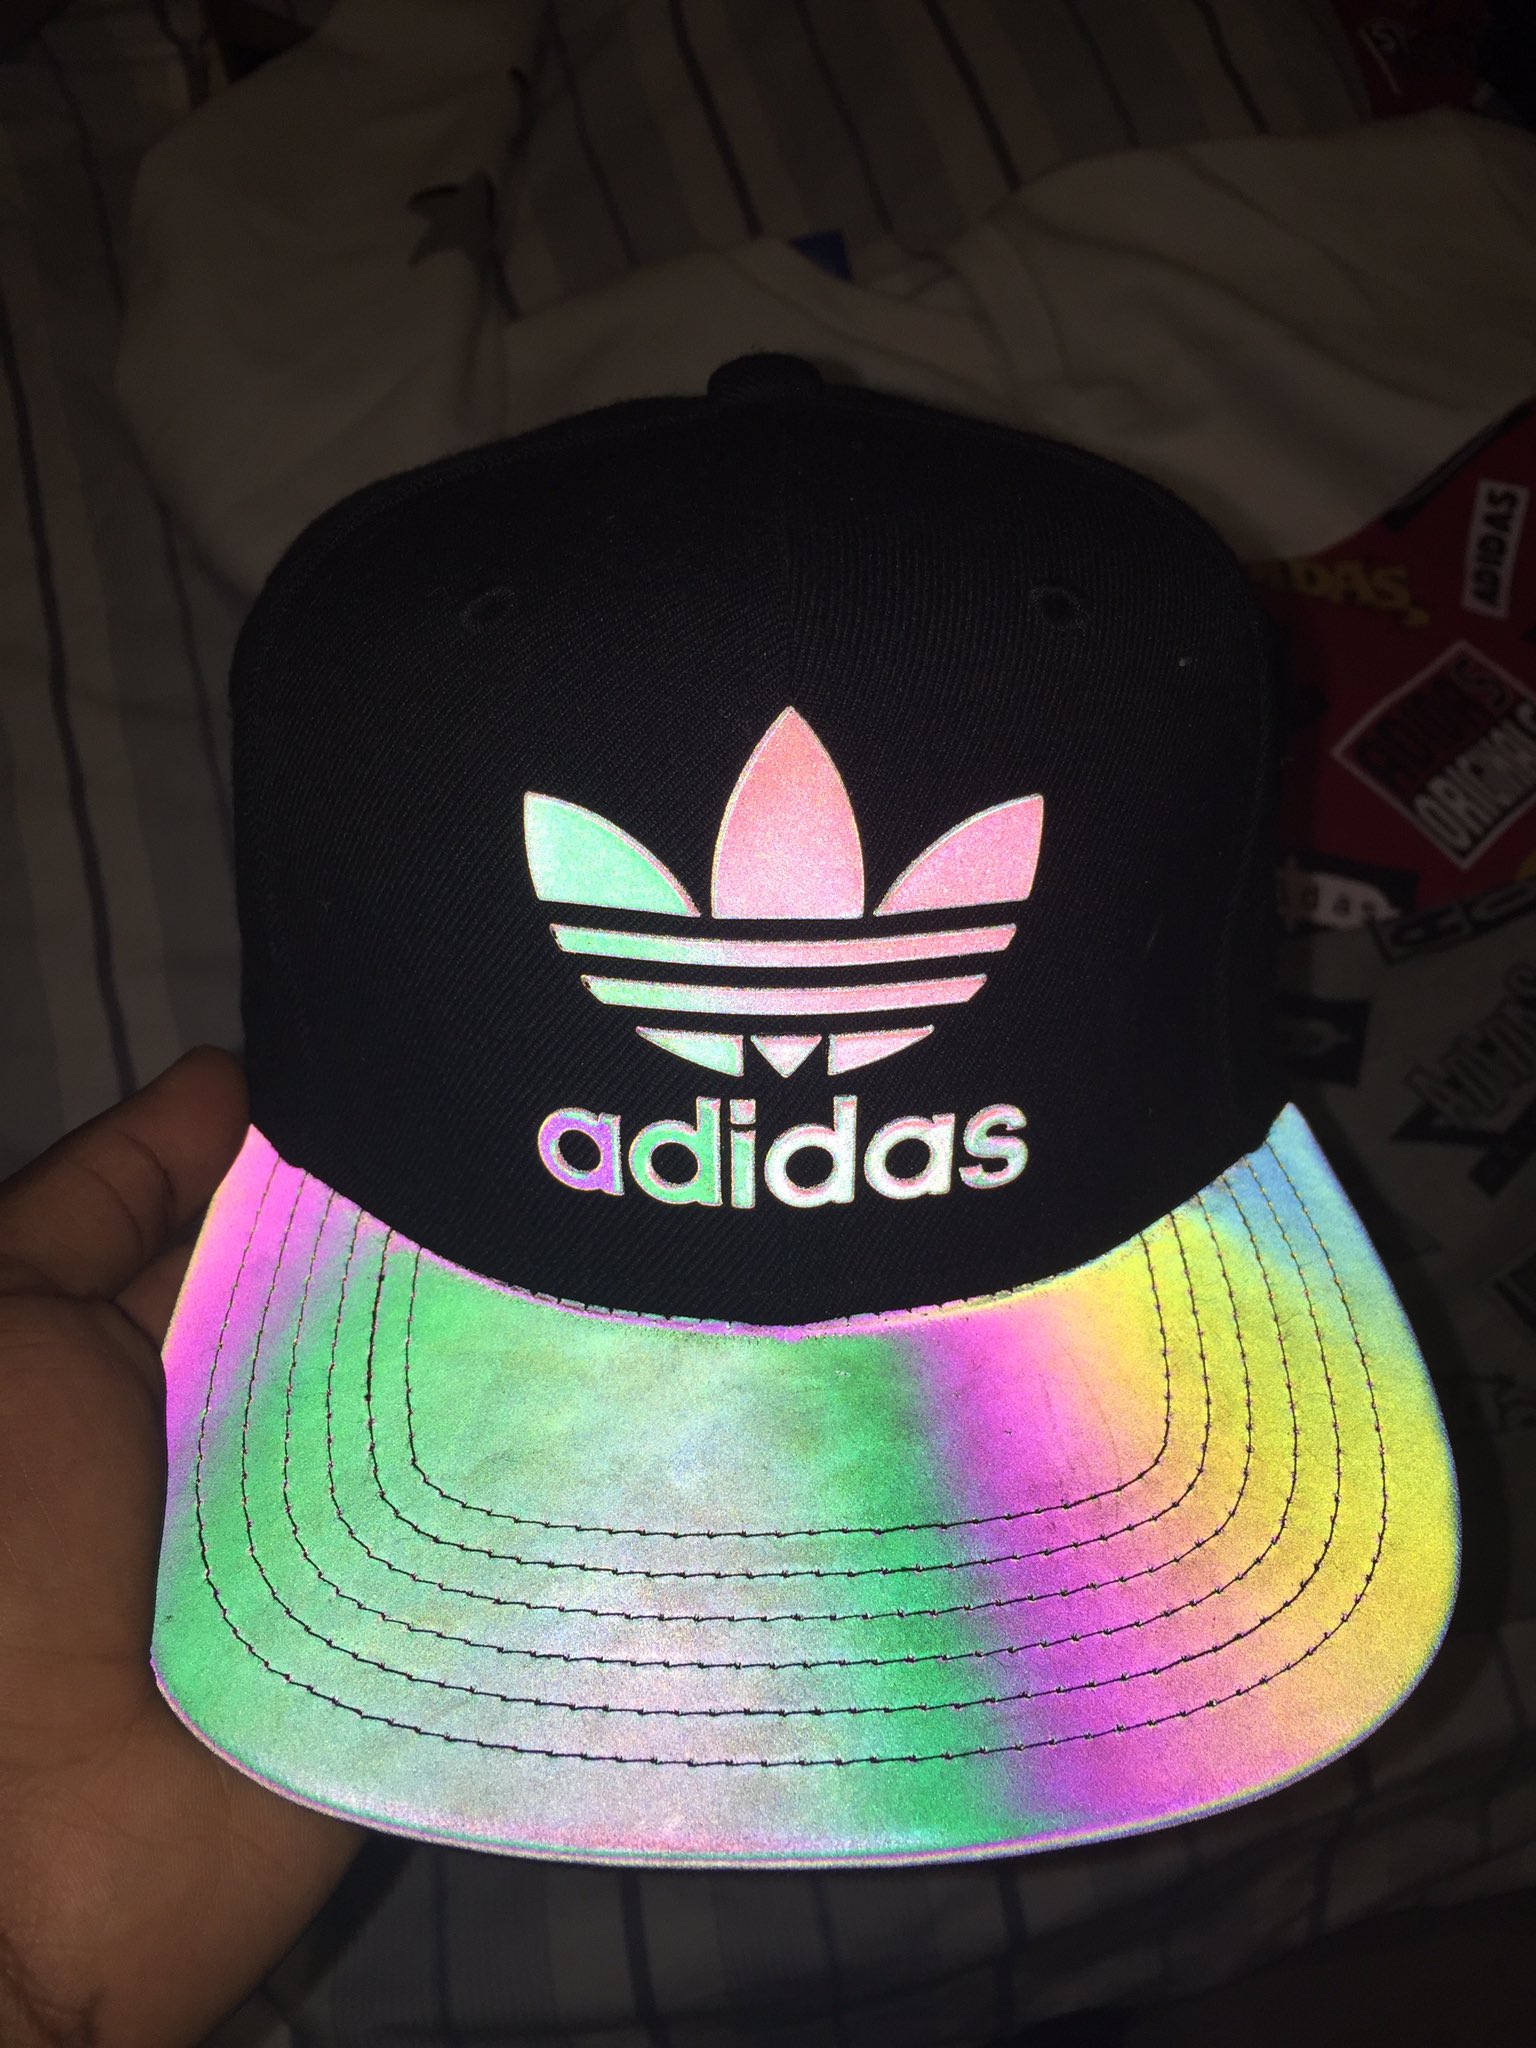 Tobi on "In other news, my Adidas hat is cooler than I thought https://t.co/XoMMiccSJr" / Twitter